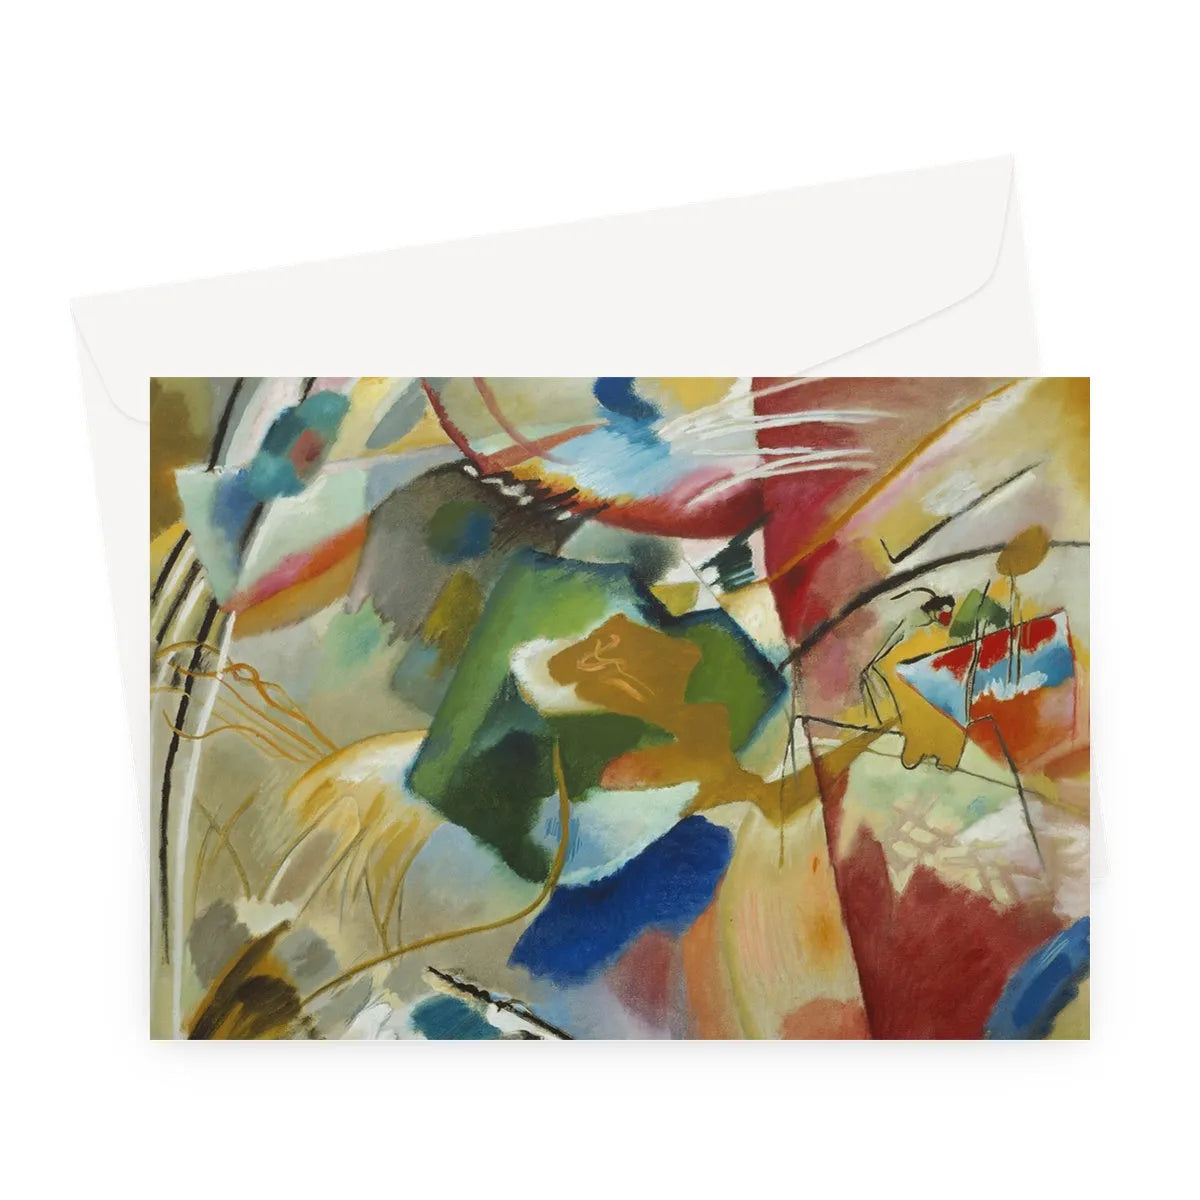 Painting With Green Center By Vasily Kandinsky Greeting Card - A5 Landscape / 1 Card - Notebooks & Notepads - Aesthetic